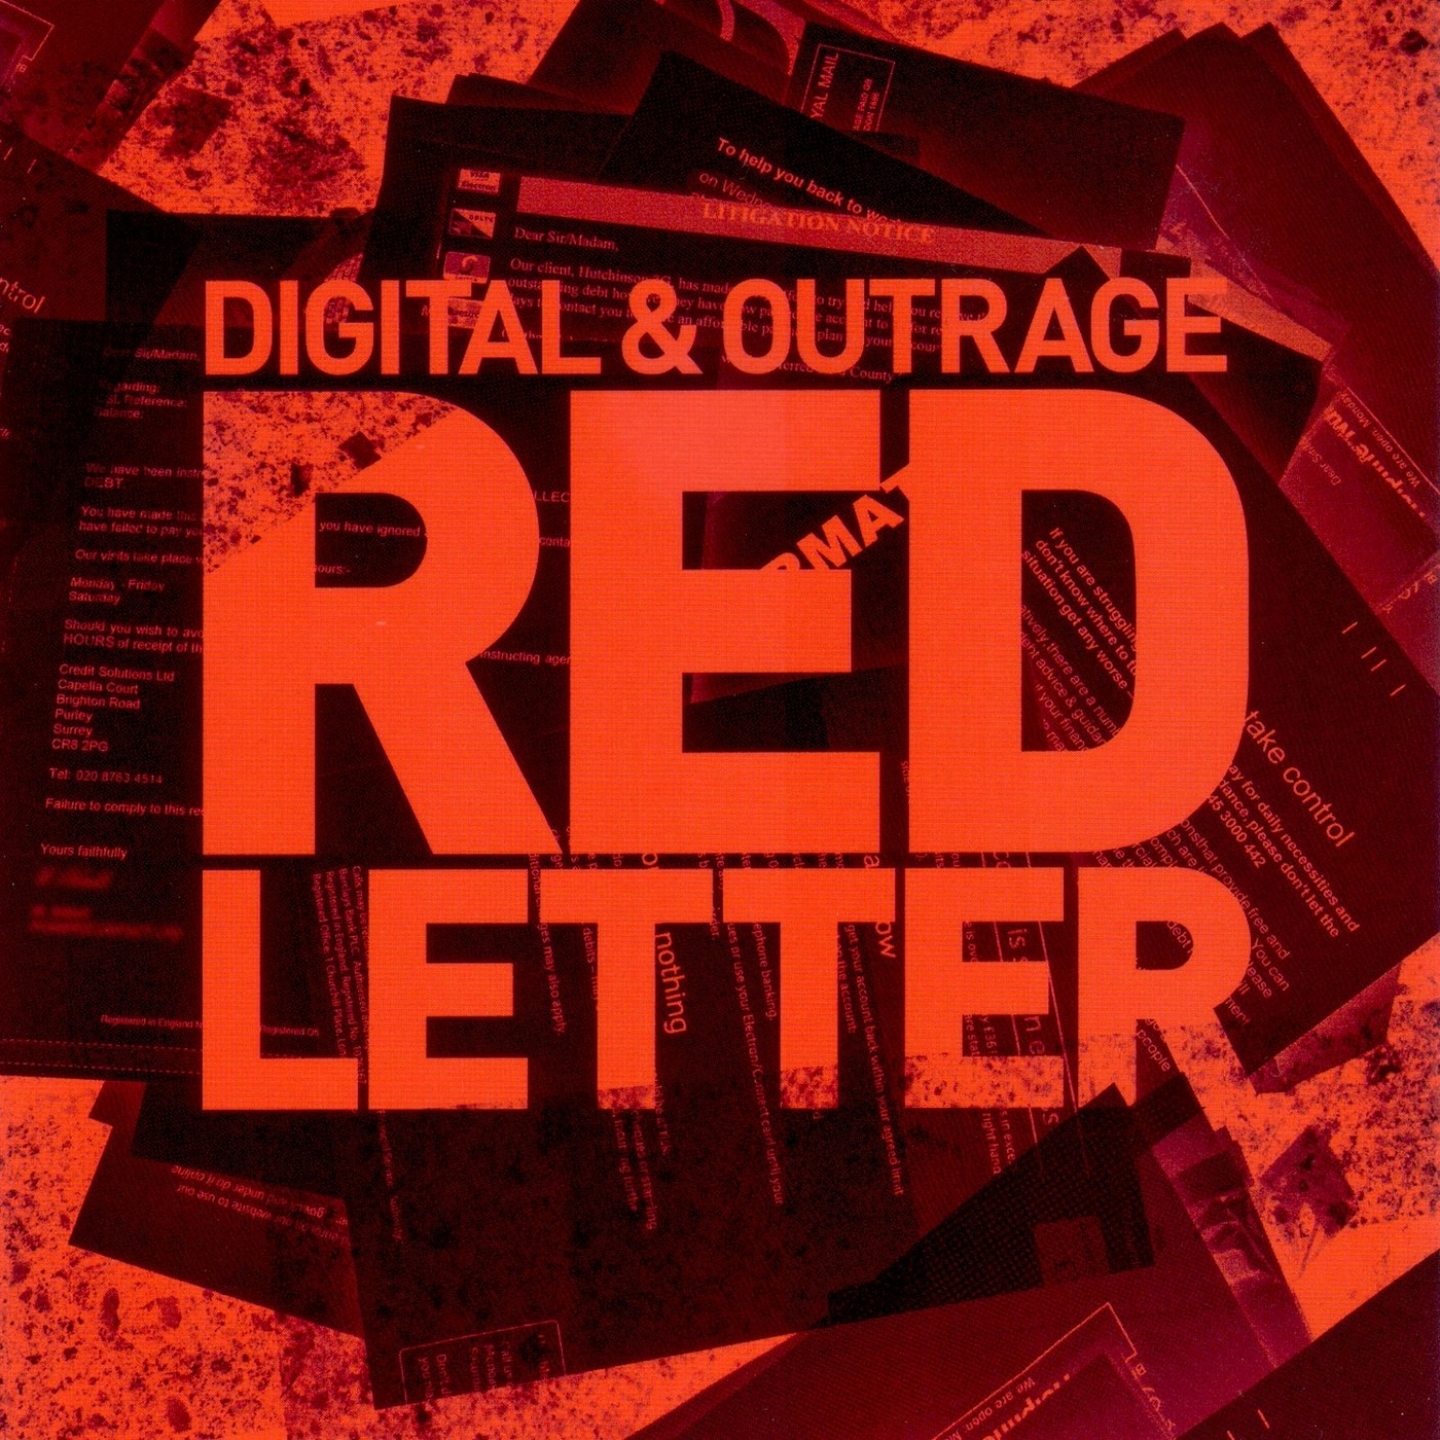 Red Letter